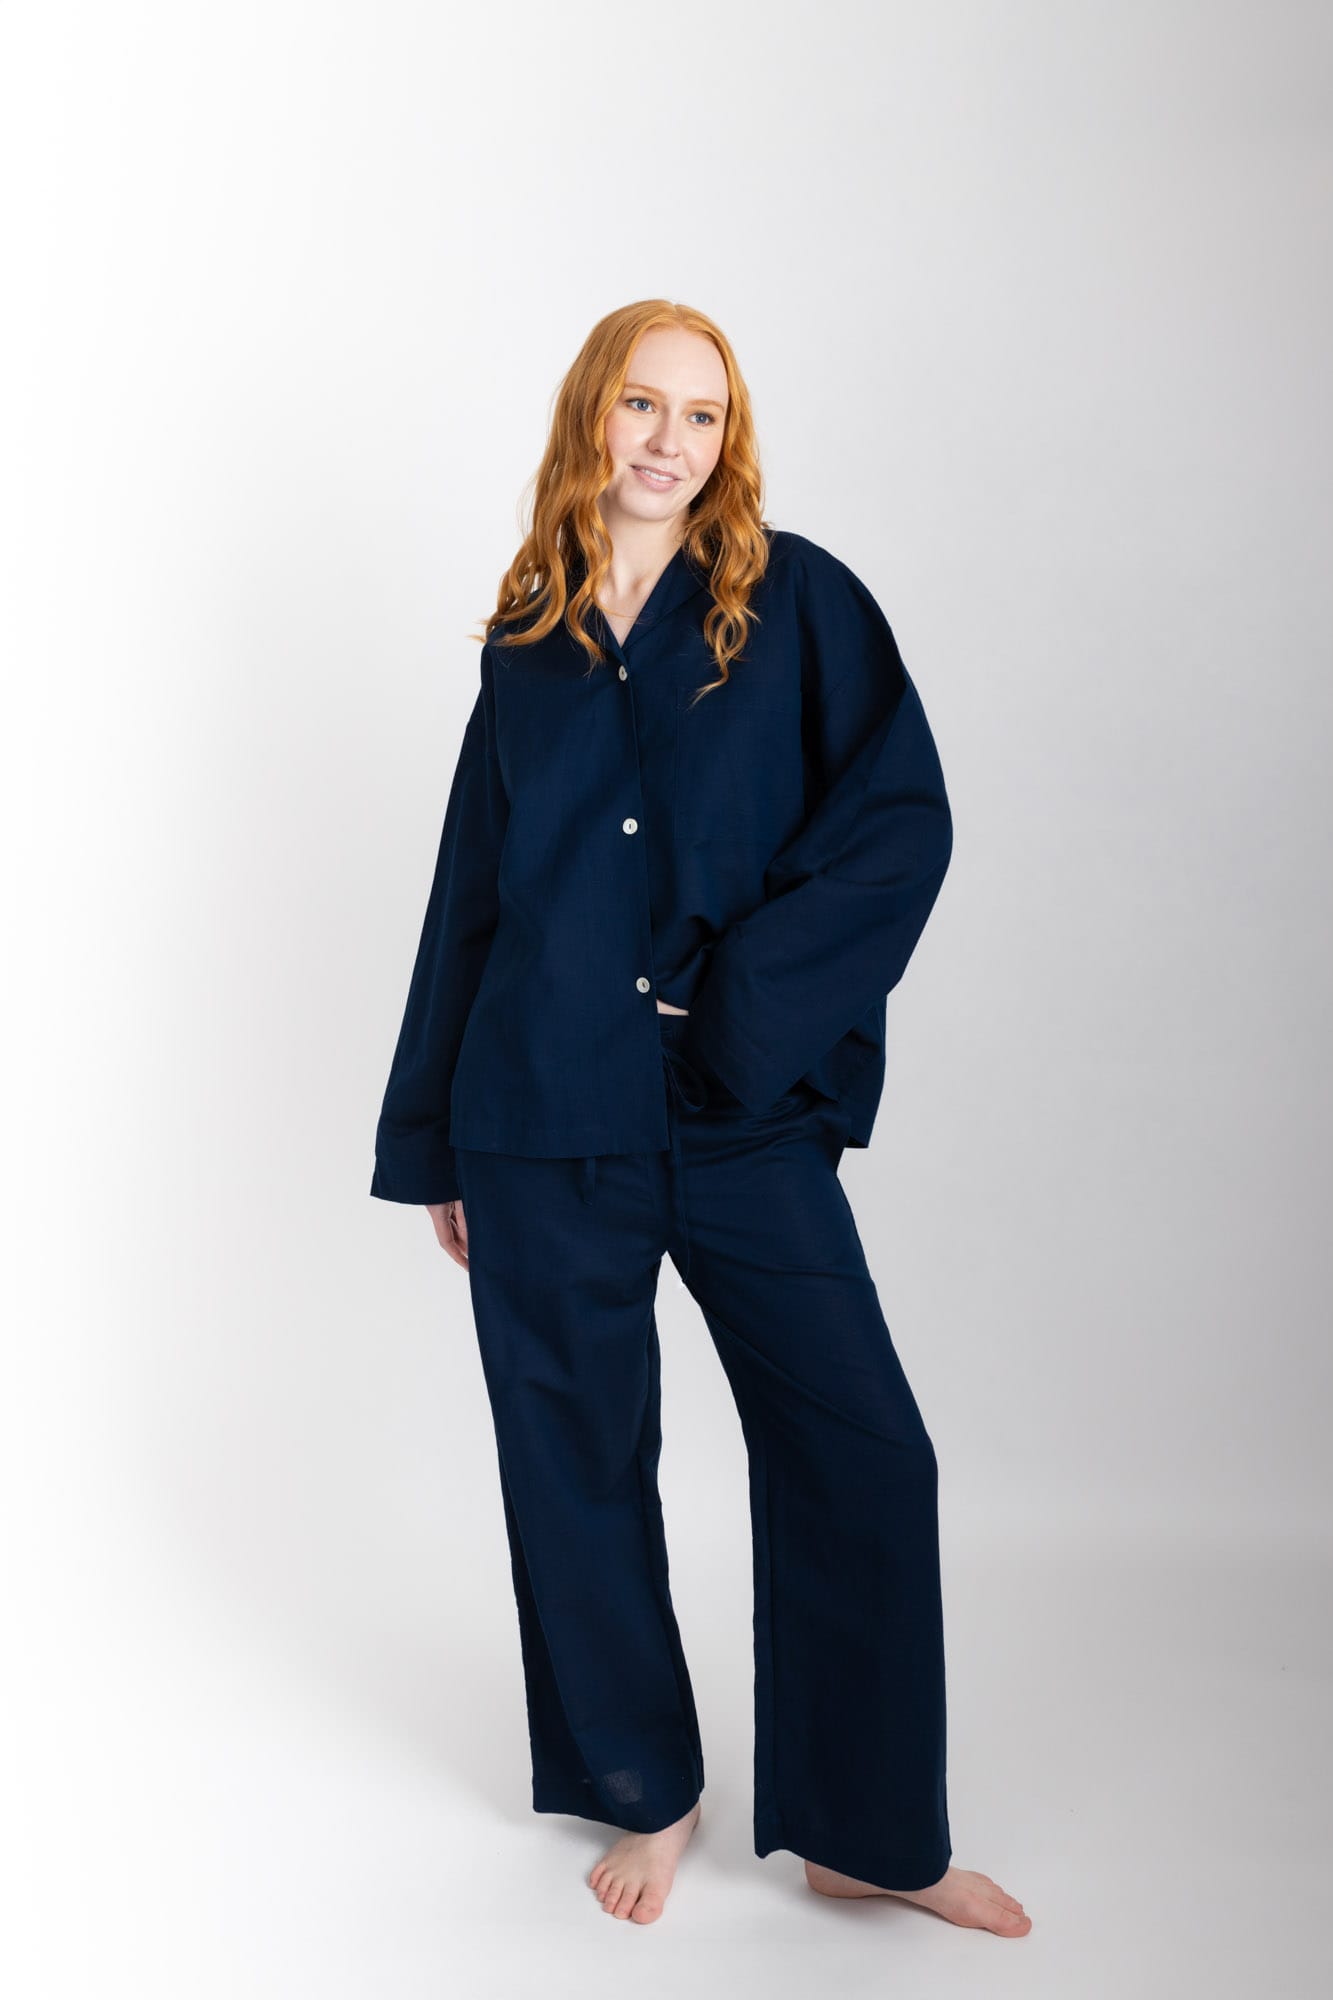 Women’s sleepwear set featuring an oversized, dropped-shoulder, button-through shirt, with natural shell buttons.  The loose-fit, straight-leg pants have an elasticated waist, flat front, and drawstring detail, and are comfortable and flattering. Made from an organic cotton and linen blend in Navy, both pieces have been finished with French seams.